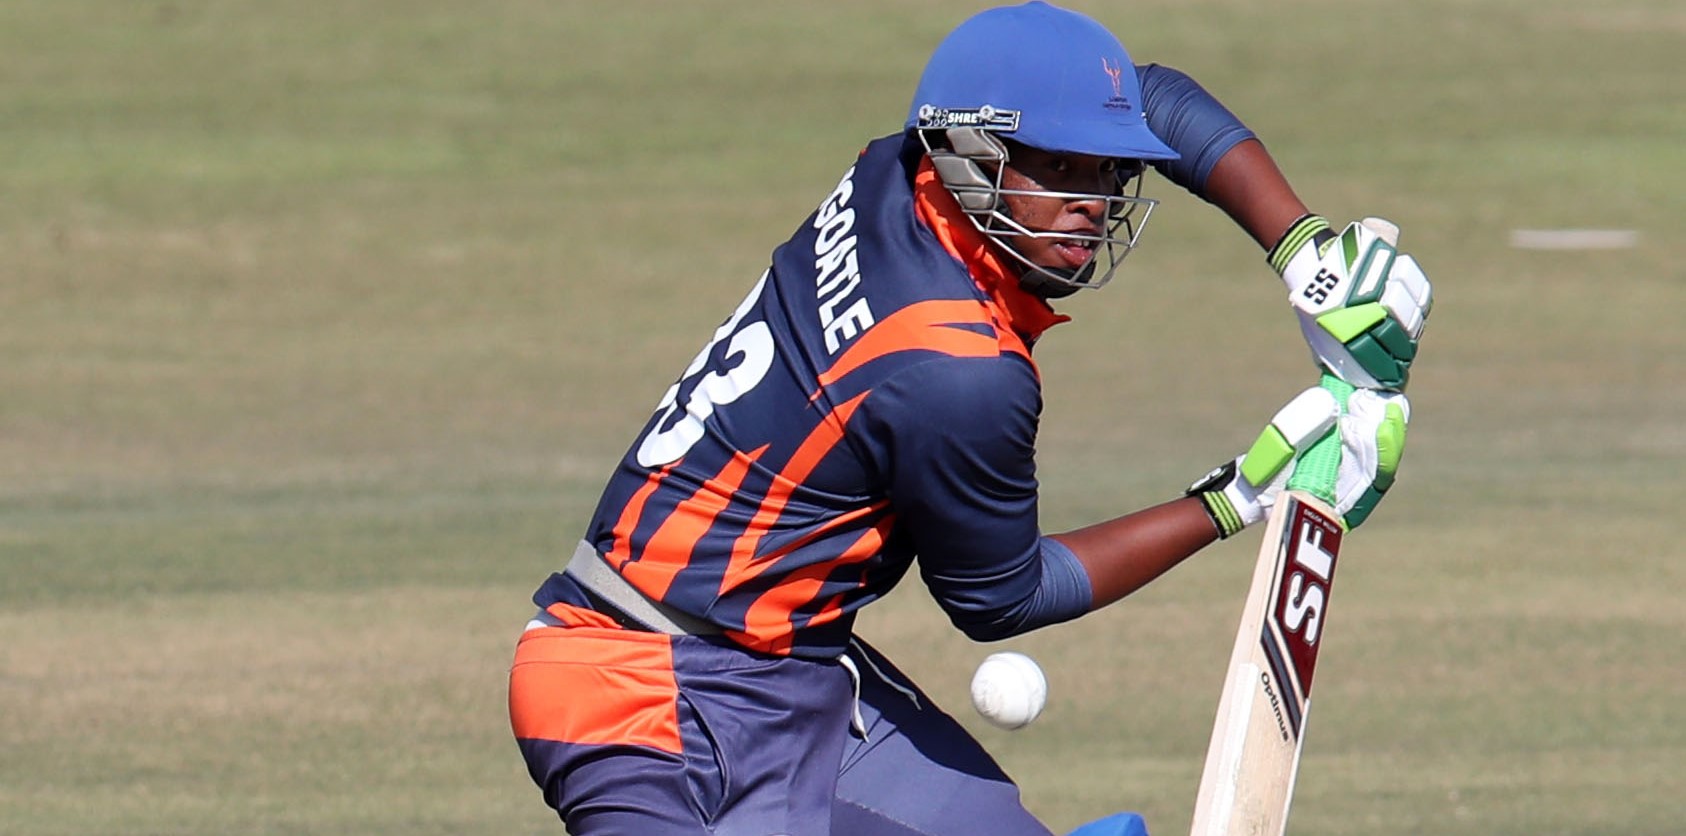 CSA T20 CUP: Top batsmen in the group stage